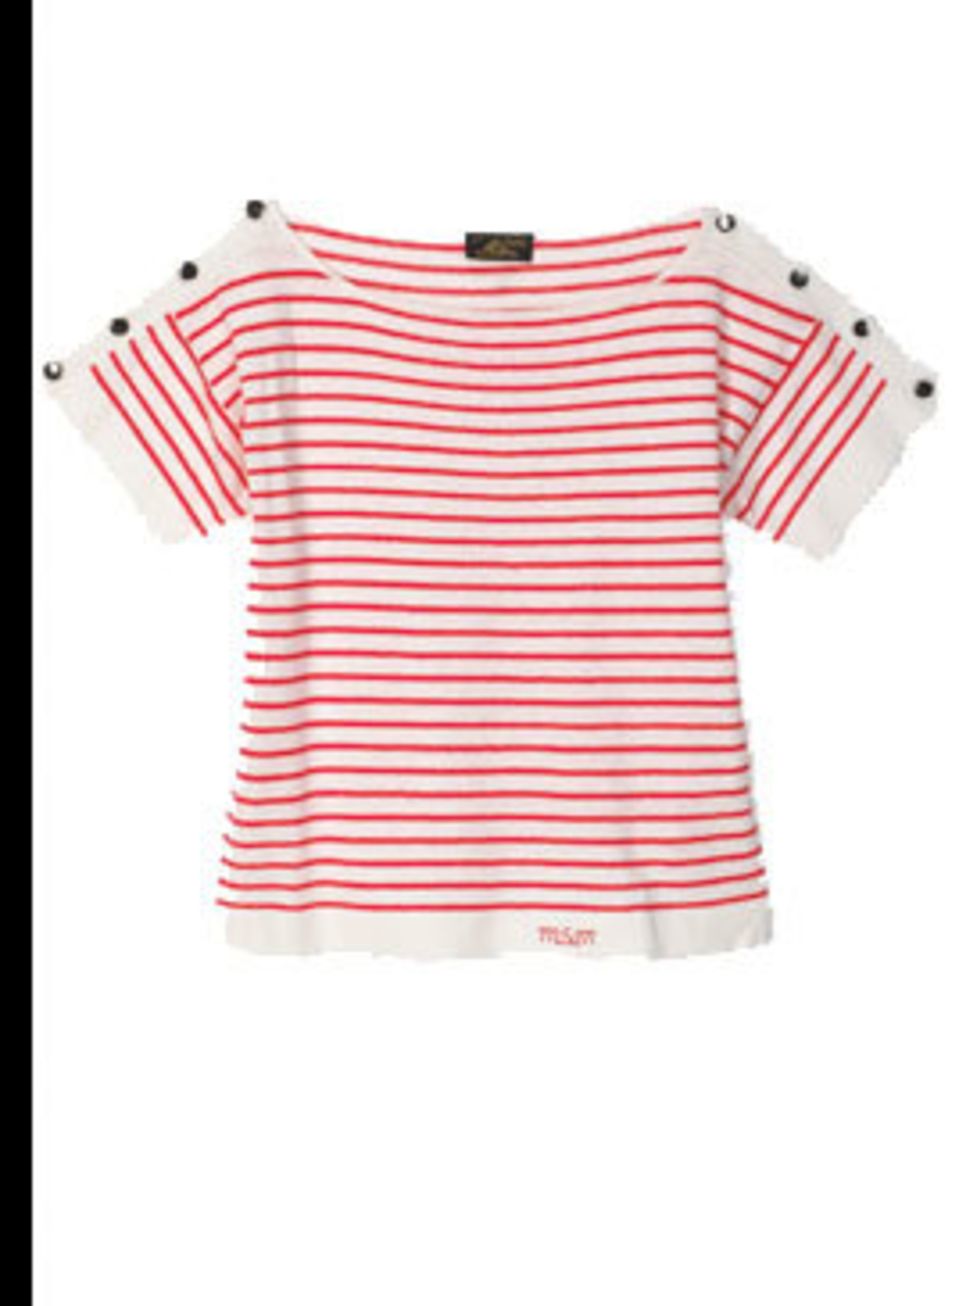 <p>Red breton top, £110, by Le Mont St Michel at<a href="http://www.urbanoutfitters.co.uk/Womens-Tops/Le-Mont-St-Michel-Stripe-Shoulder-Knit/invt/5114427953506"> Urban Outfitters</a></p>